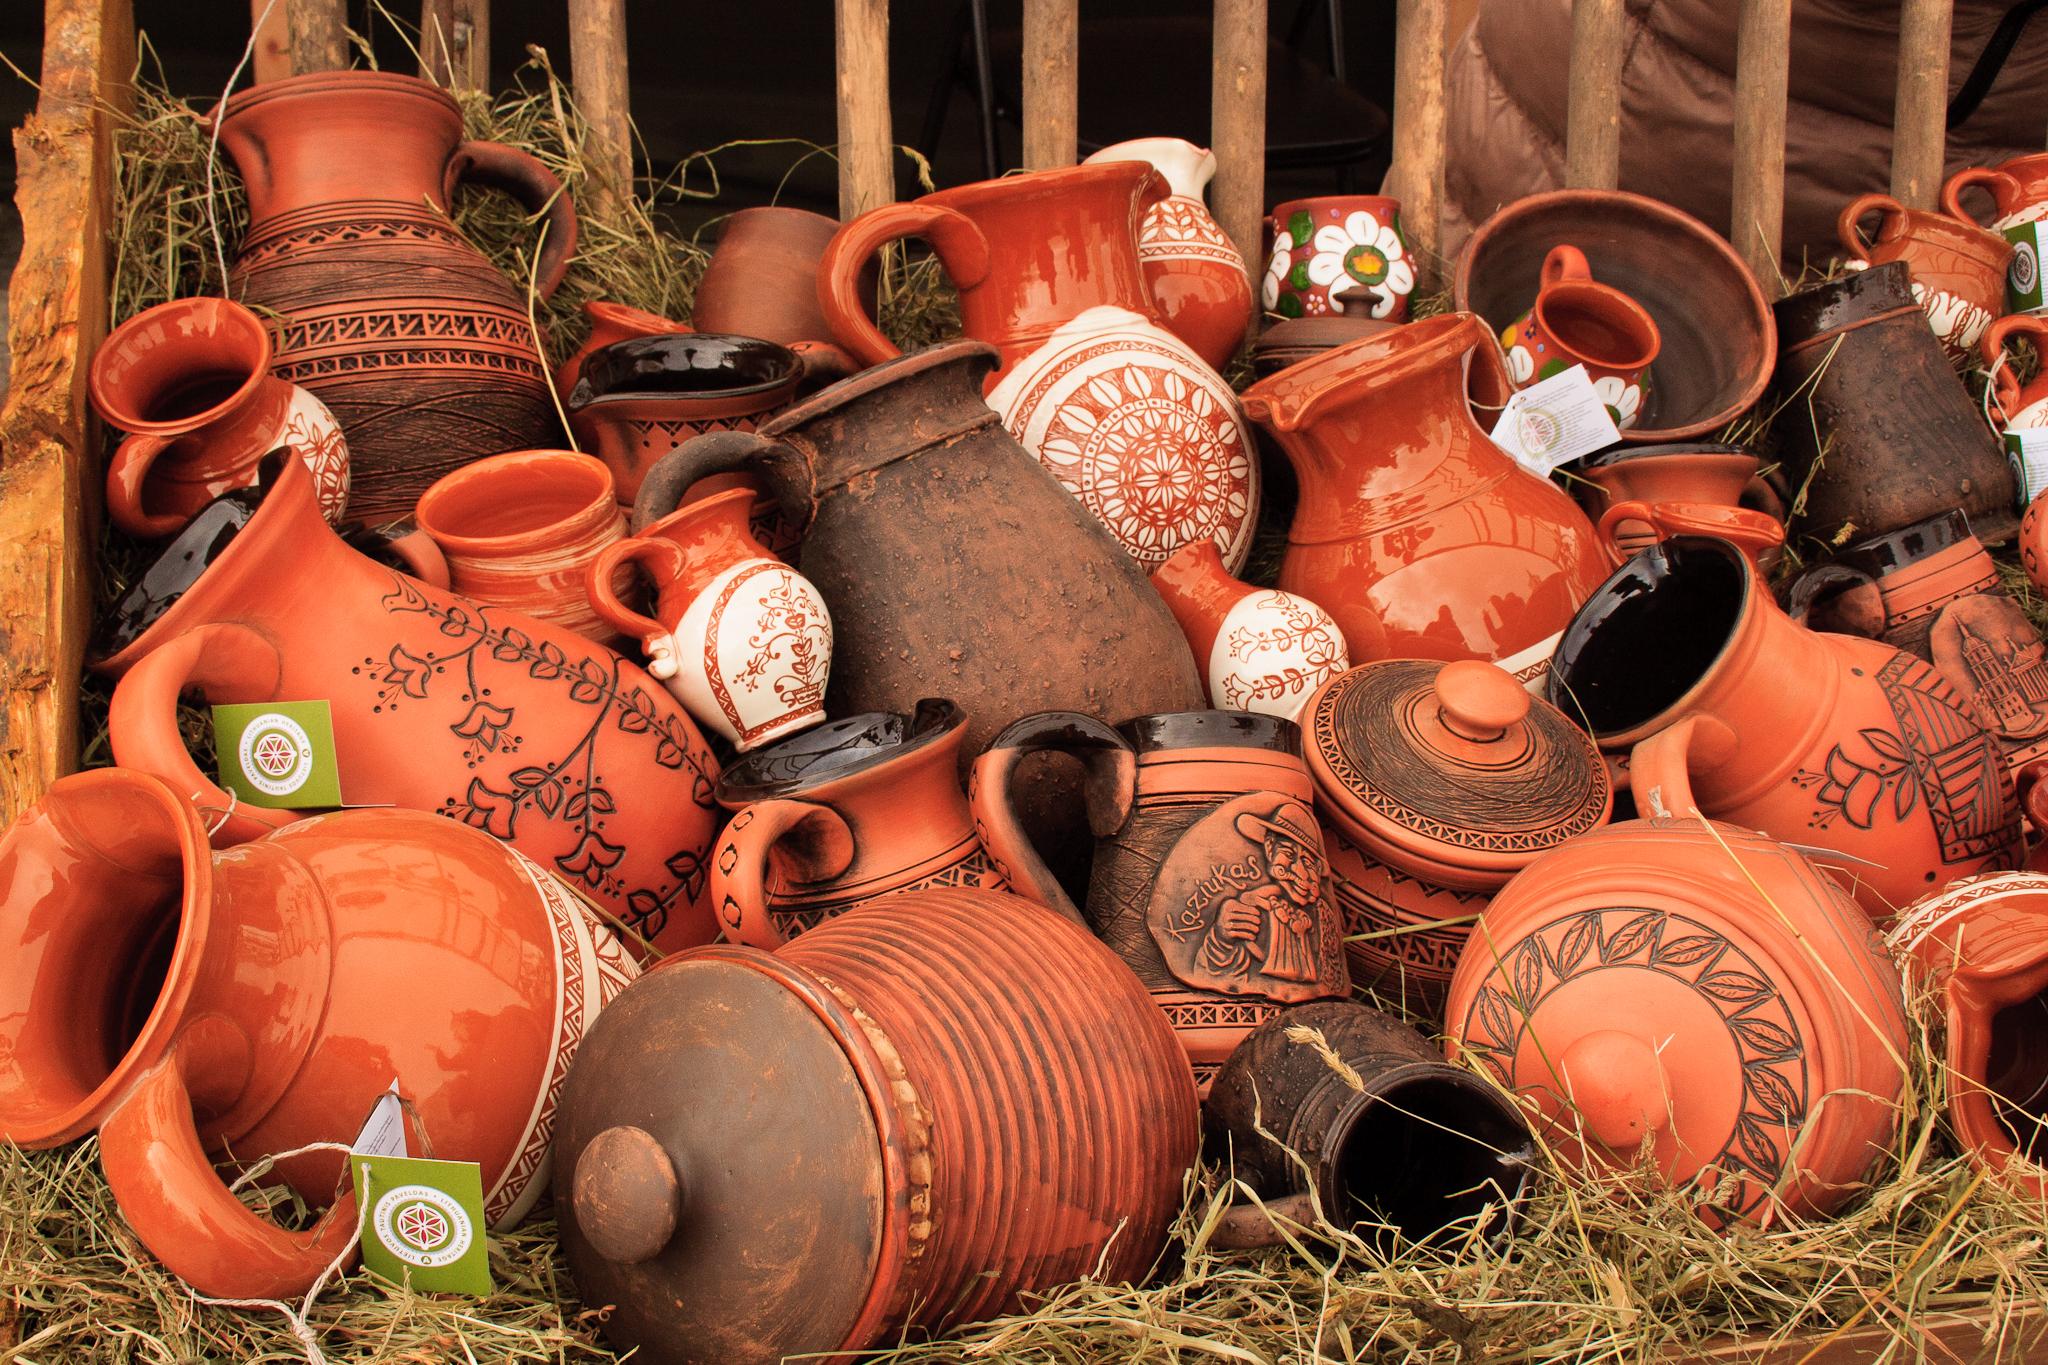 Guests are invited to participate in the pottery workshop in Vilnius. – © www.vilnius-tourism.lt